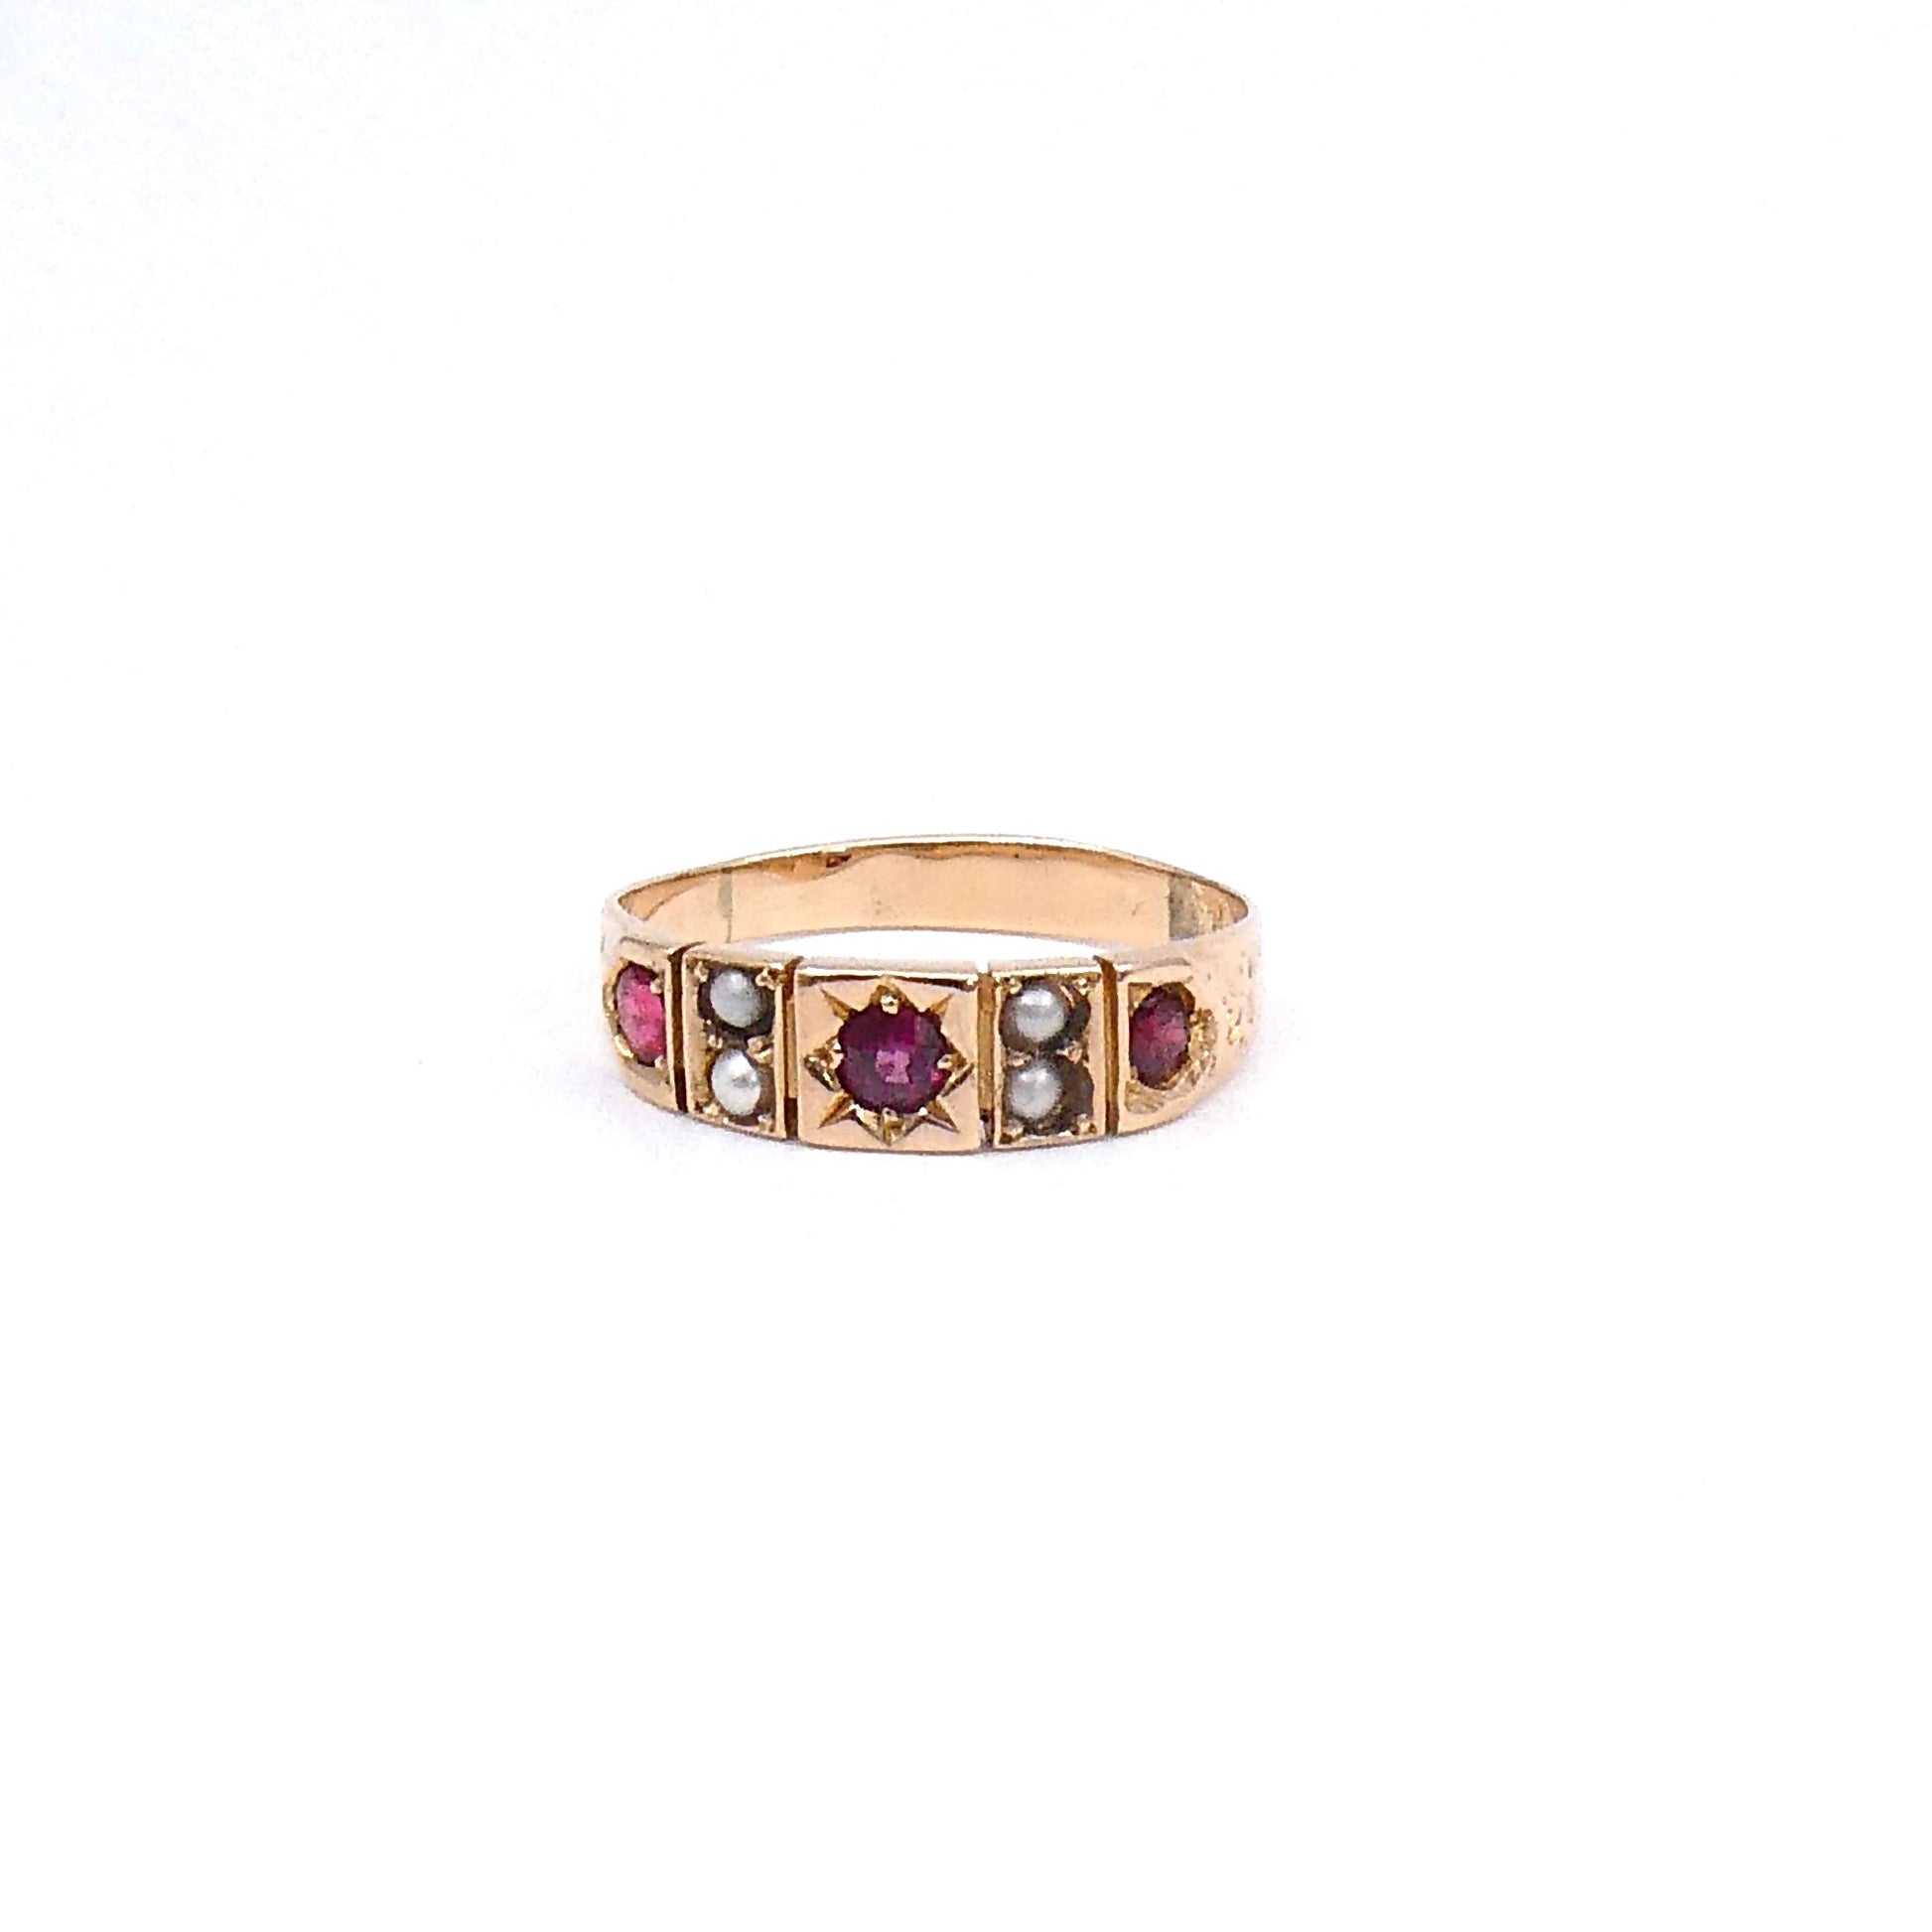 Antique garnet and pearl band, set in a star and cluster setting with a floral design on the shoulders - Collected